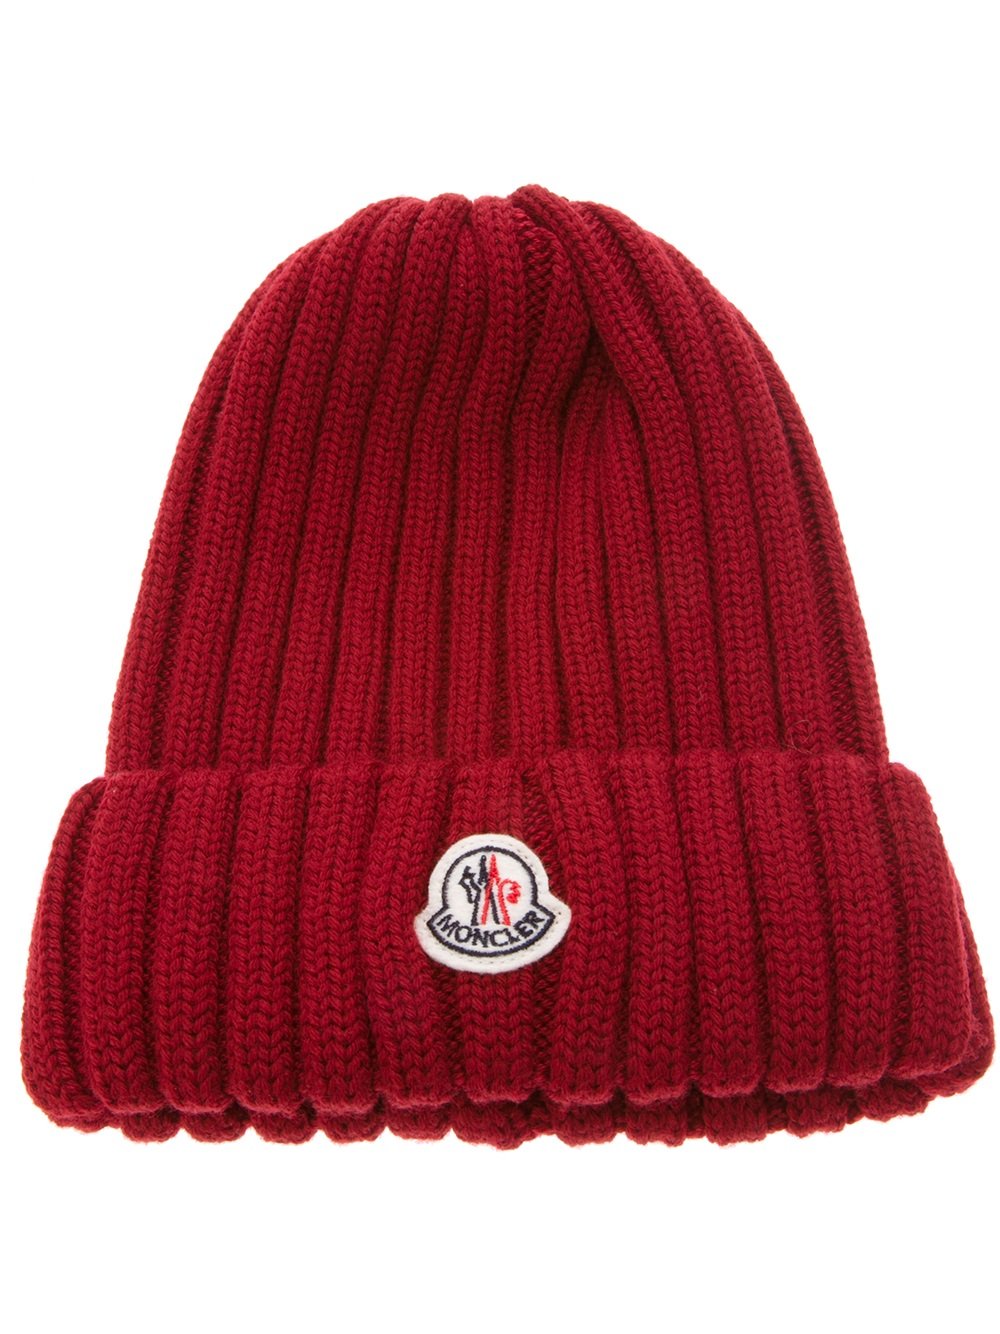 Lyst - Moncler Wool Ribbed Knit Beanie in Red for Men